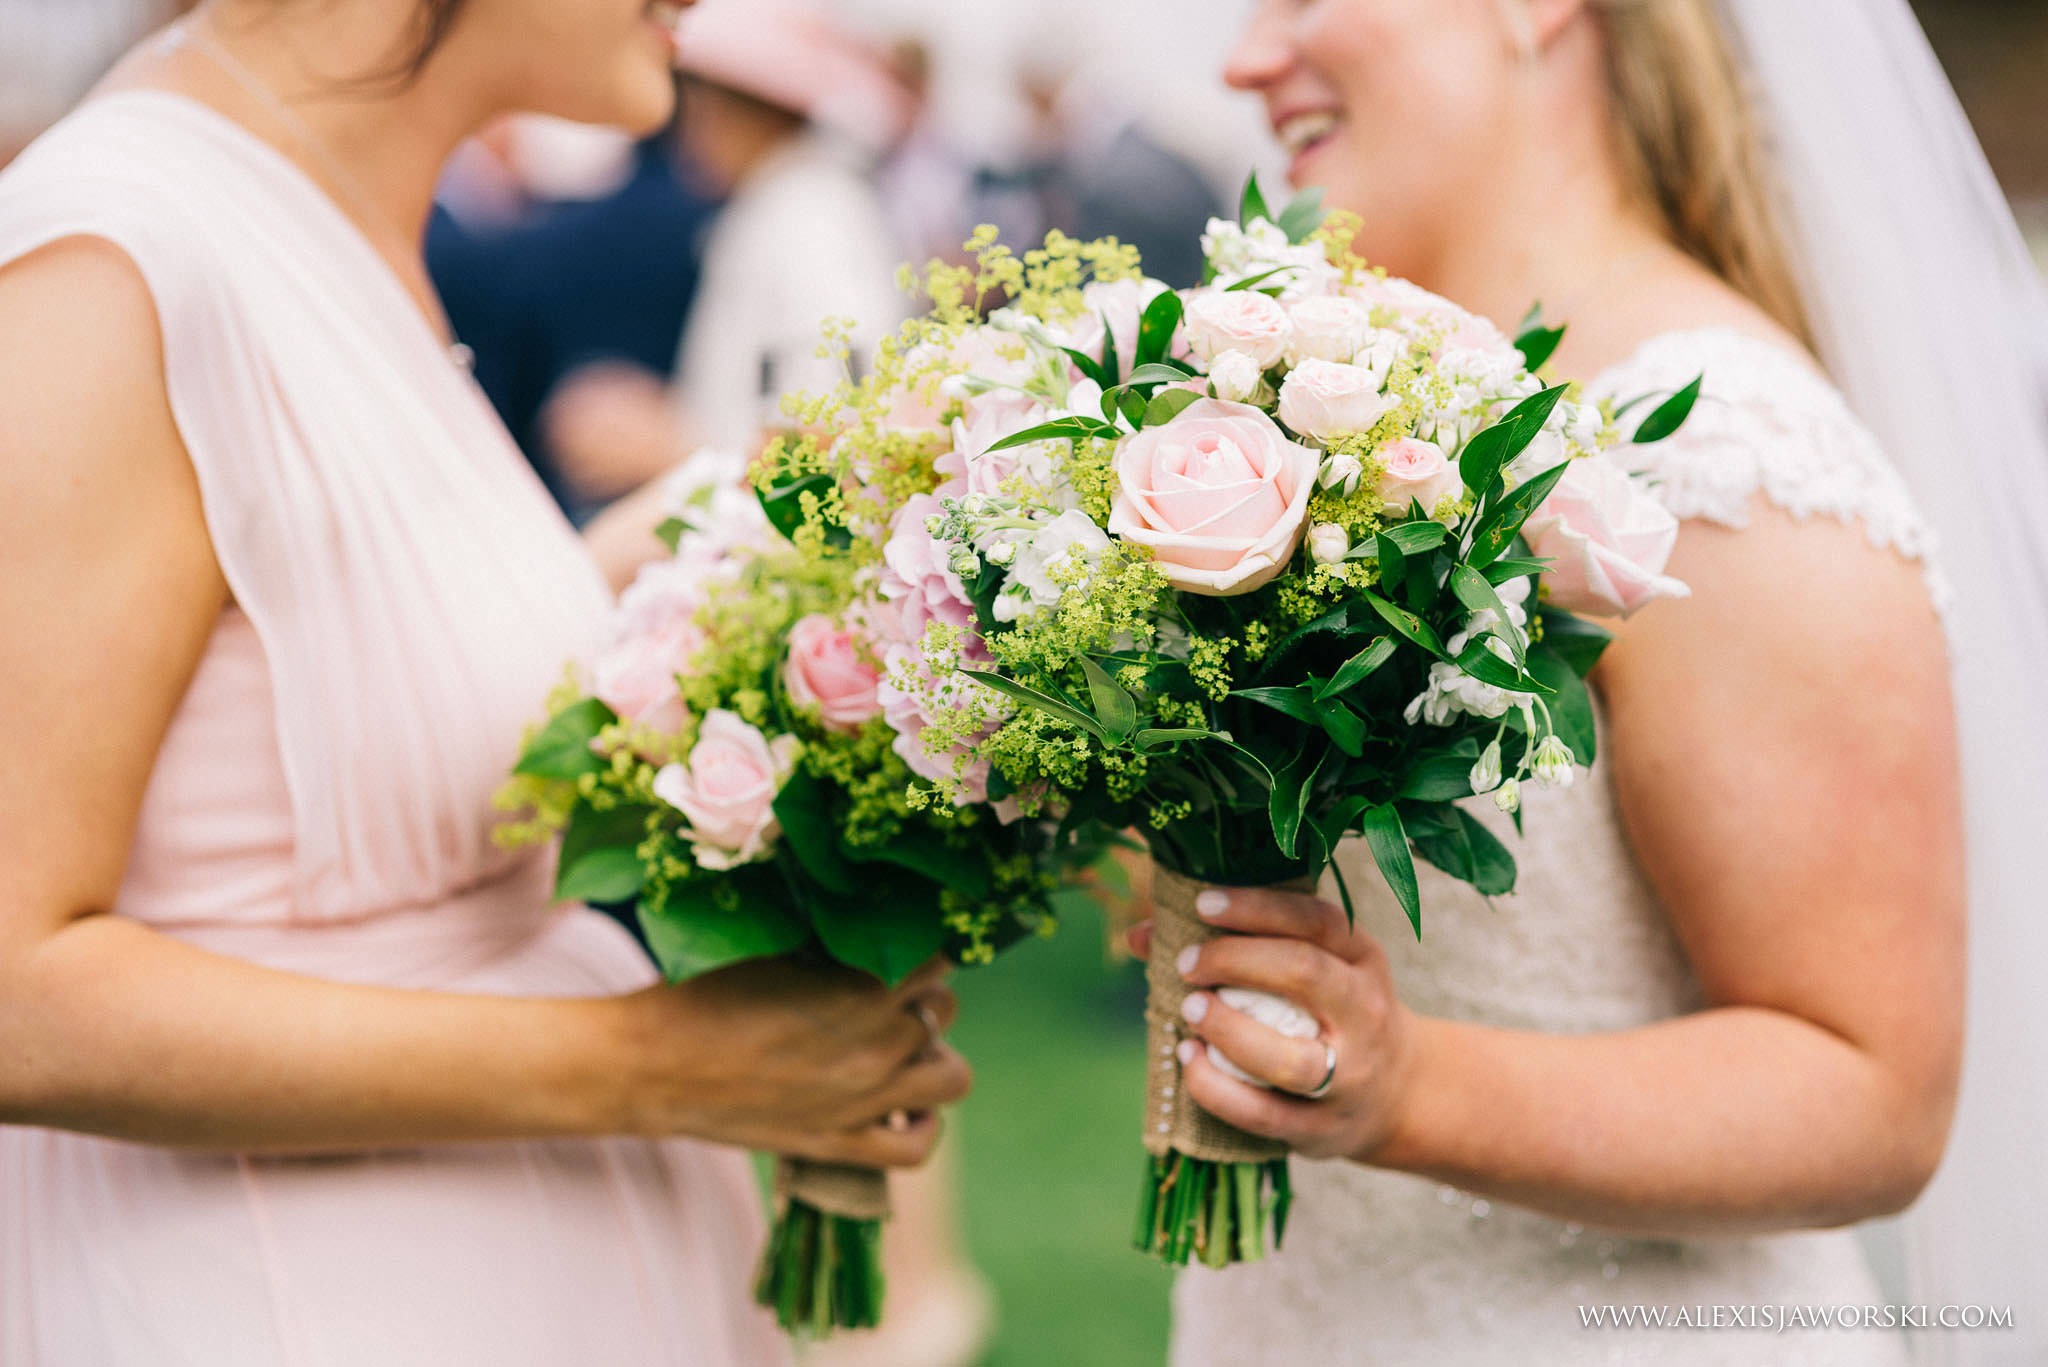 flowers of the bride and bridesmaid